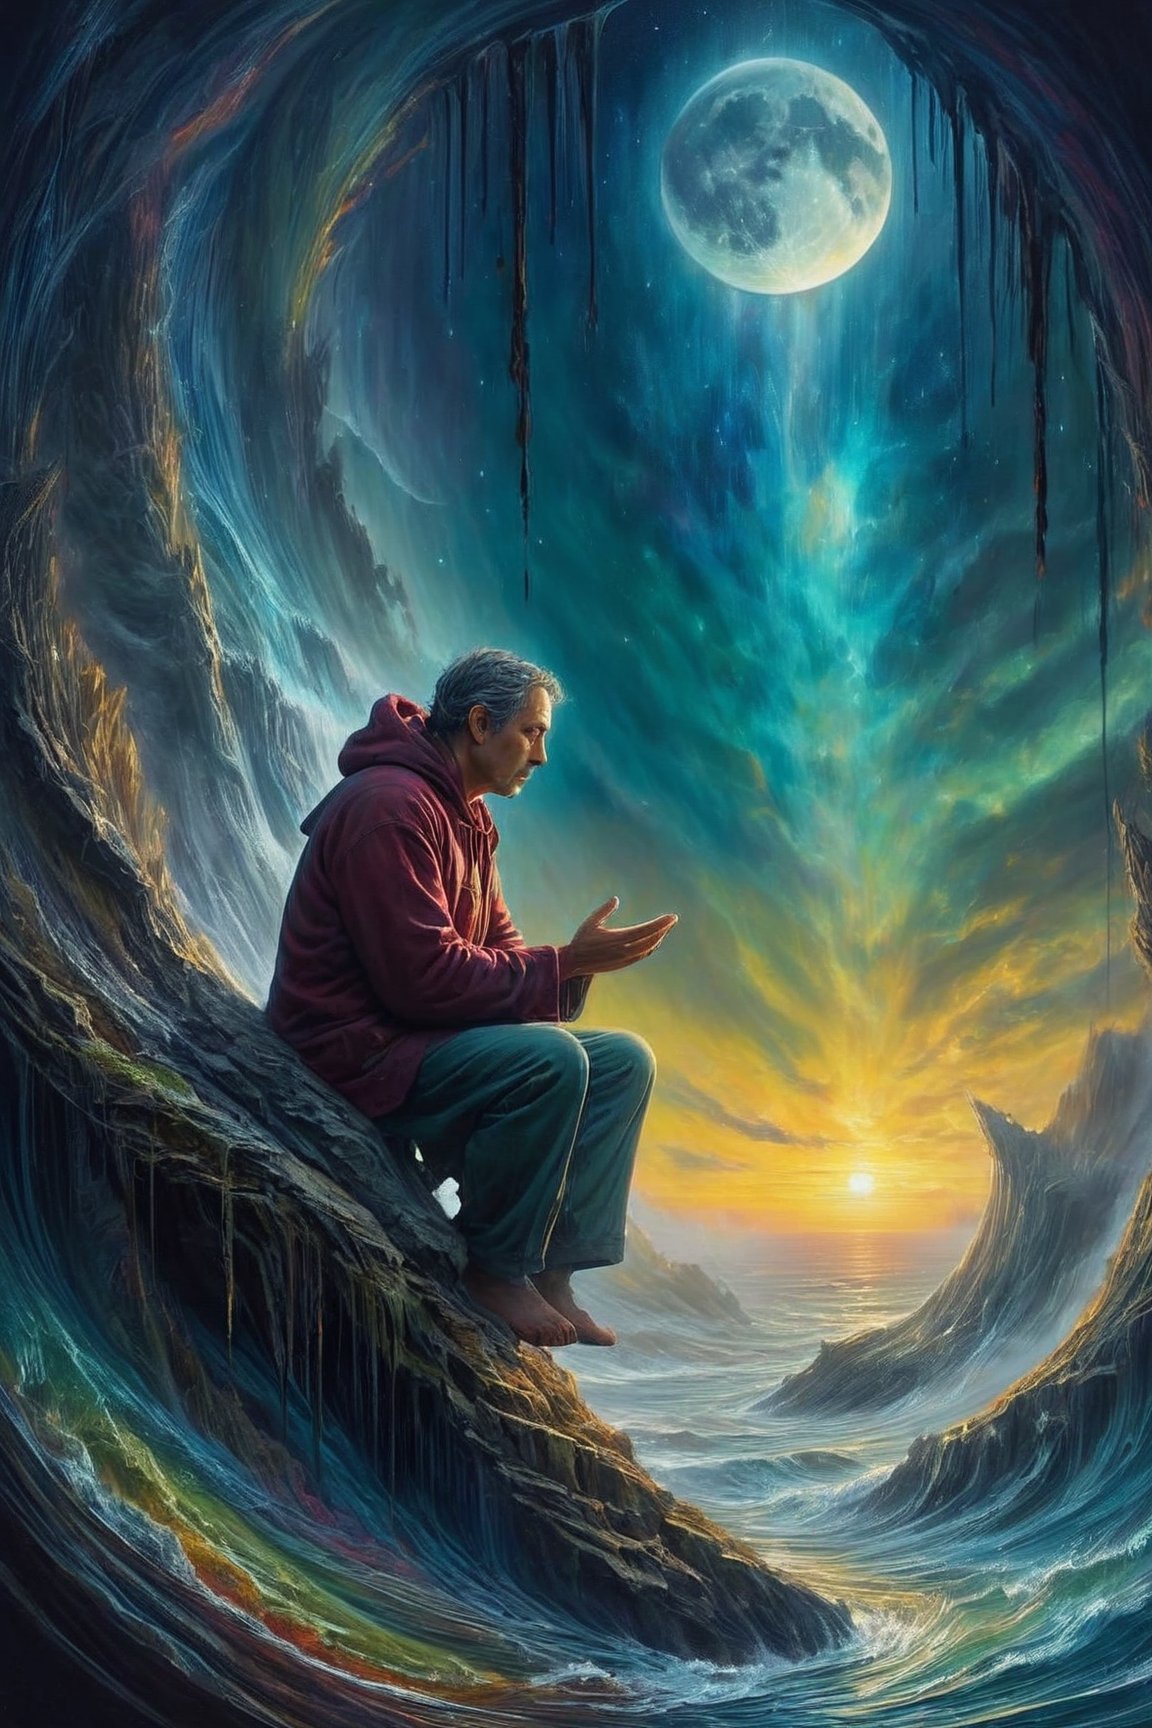 Breathing life into every moment, hanging onto words like lifelines, reaching out to touch the fleeting night before the sun arrives. A beautifully detailed image of a man immersed in a moment of contemplation, captured in a stunning painting. Every brushstroke radiates emotion and depth, with vibrant colors and intricate details bringing the scene to life. The high quality of the artwork is evident in the lifelike portrayal of the man's deep and introspective expression, drawing viewers into the poignant narrative of the fleeting nature of time.,art_booster,Decora_SWstyle